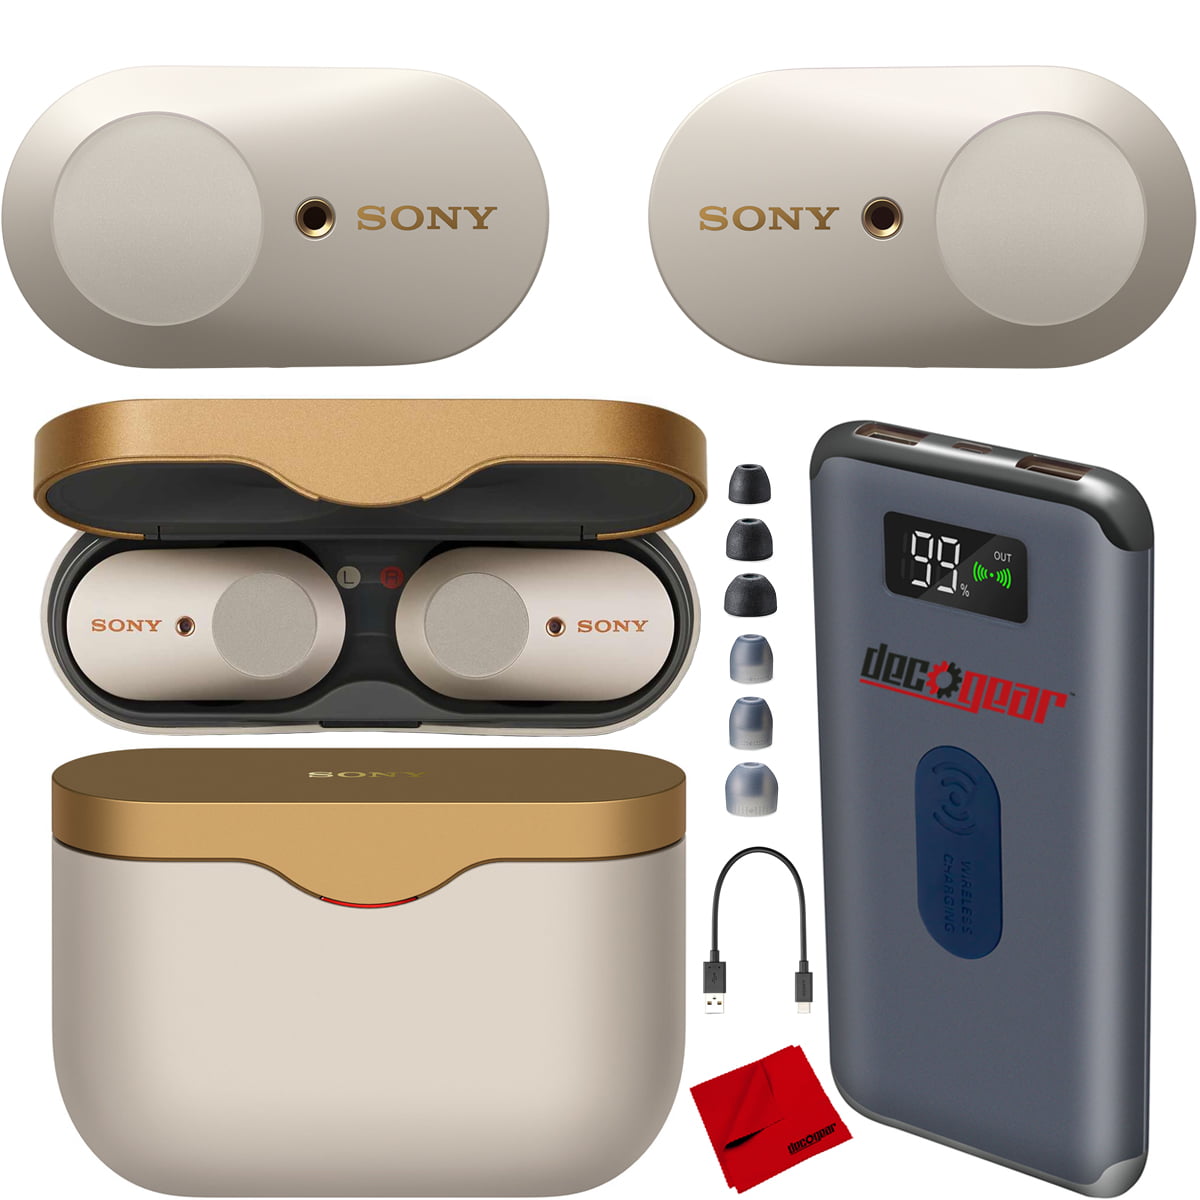 Sony WF-1000XM3 Truly Wireless Earbuds Headphones with Industry-leading  Noise Cancellation - Silver WF-1000XM3/S With Charging Case Bundle  Including Deco Gear Power Bank Charger + Headphone Cloth - Walmart.com